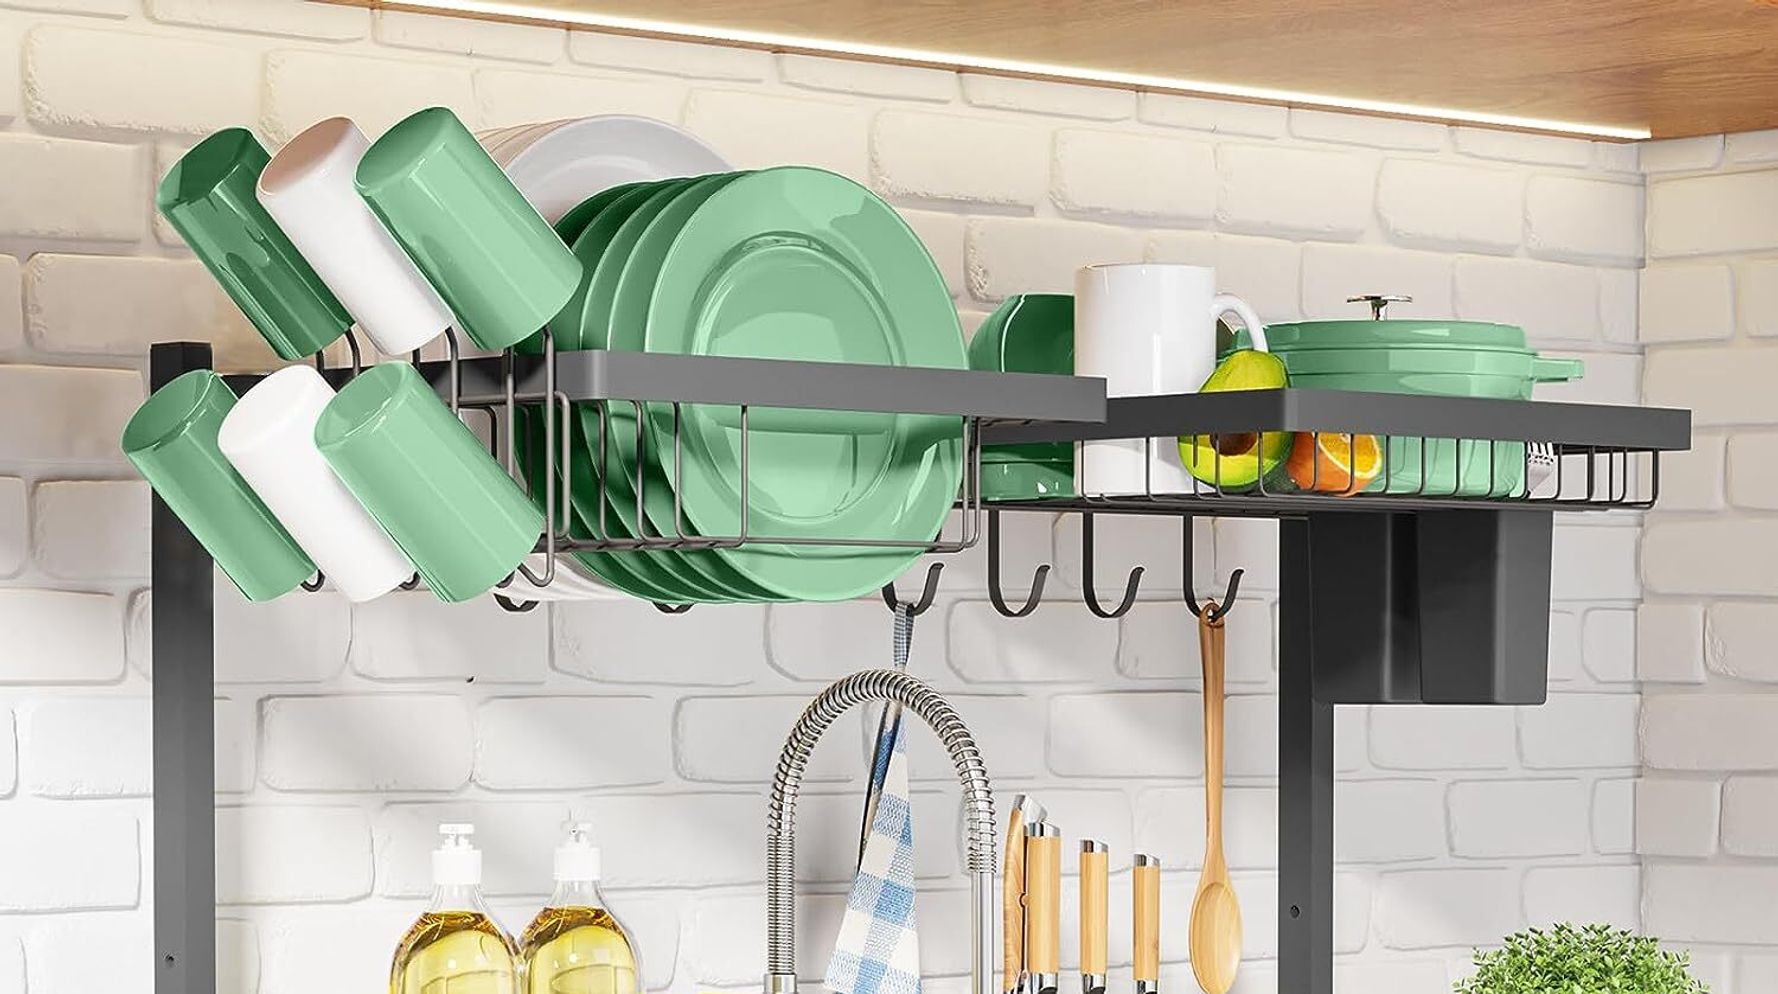 If You Have an Impossibly Small Kitchen, This Genius Dish Rack's